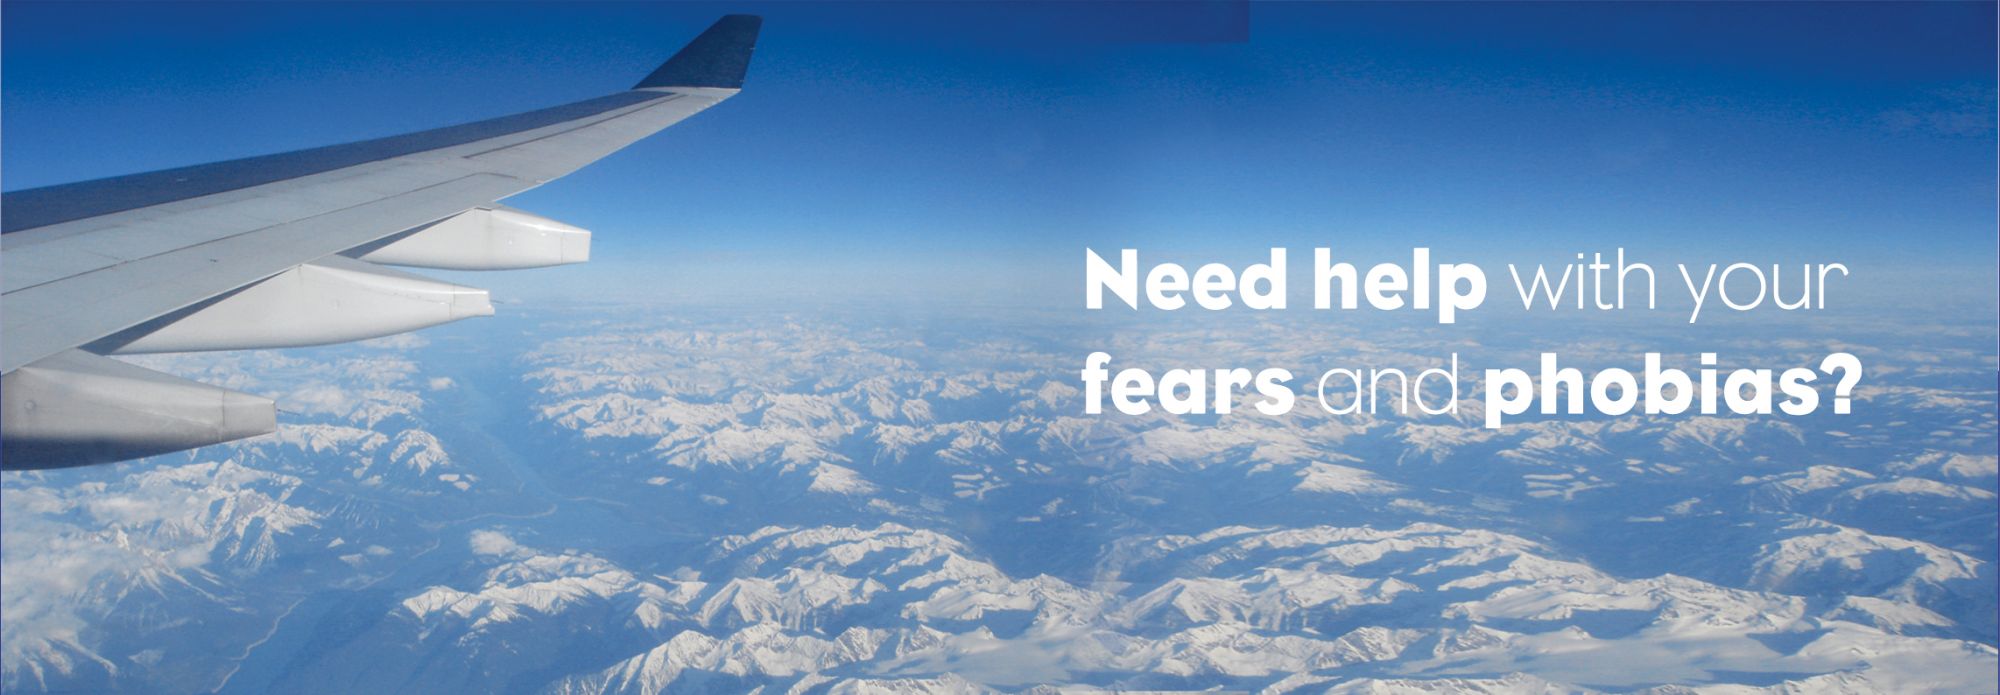 Need help with your fears and phobias?